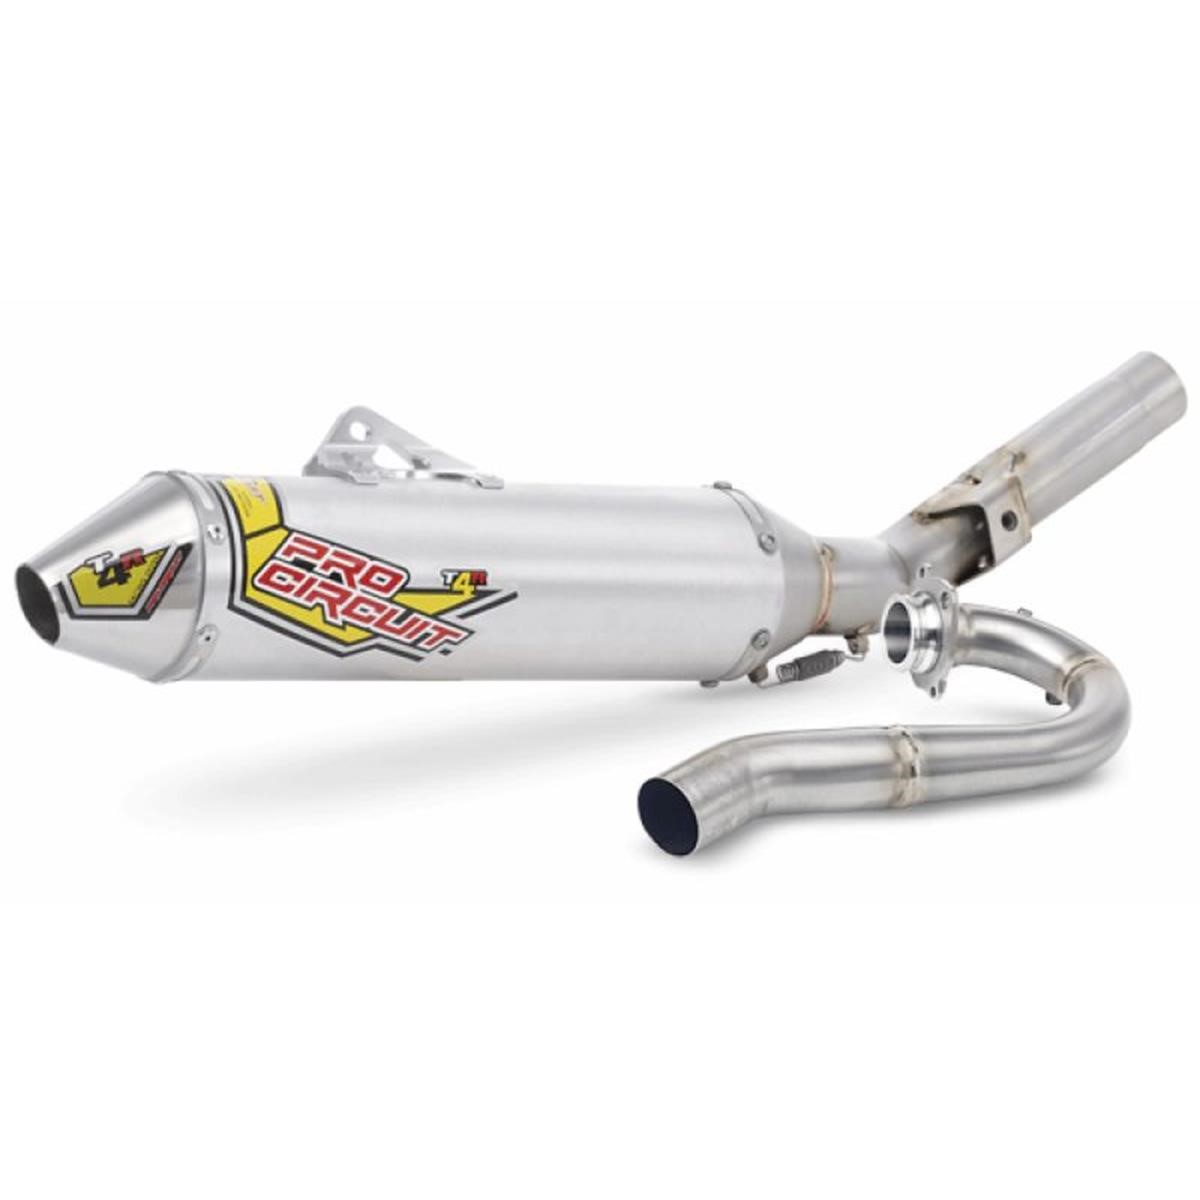 Pro Circuit Ligne complète T-4R Slip On Honda CRF 450 2011, Stainless Steel/Aluminium/Stainless Steel